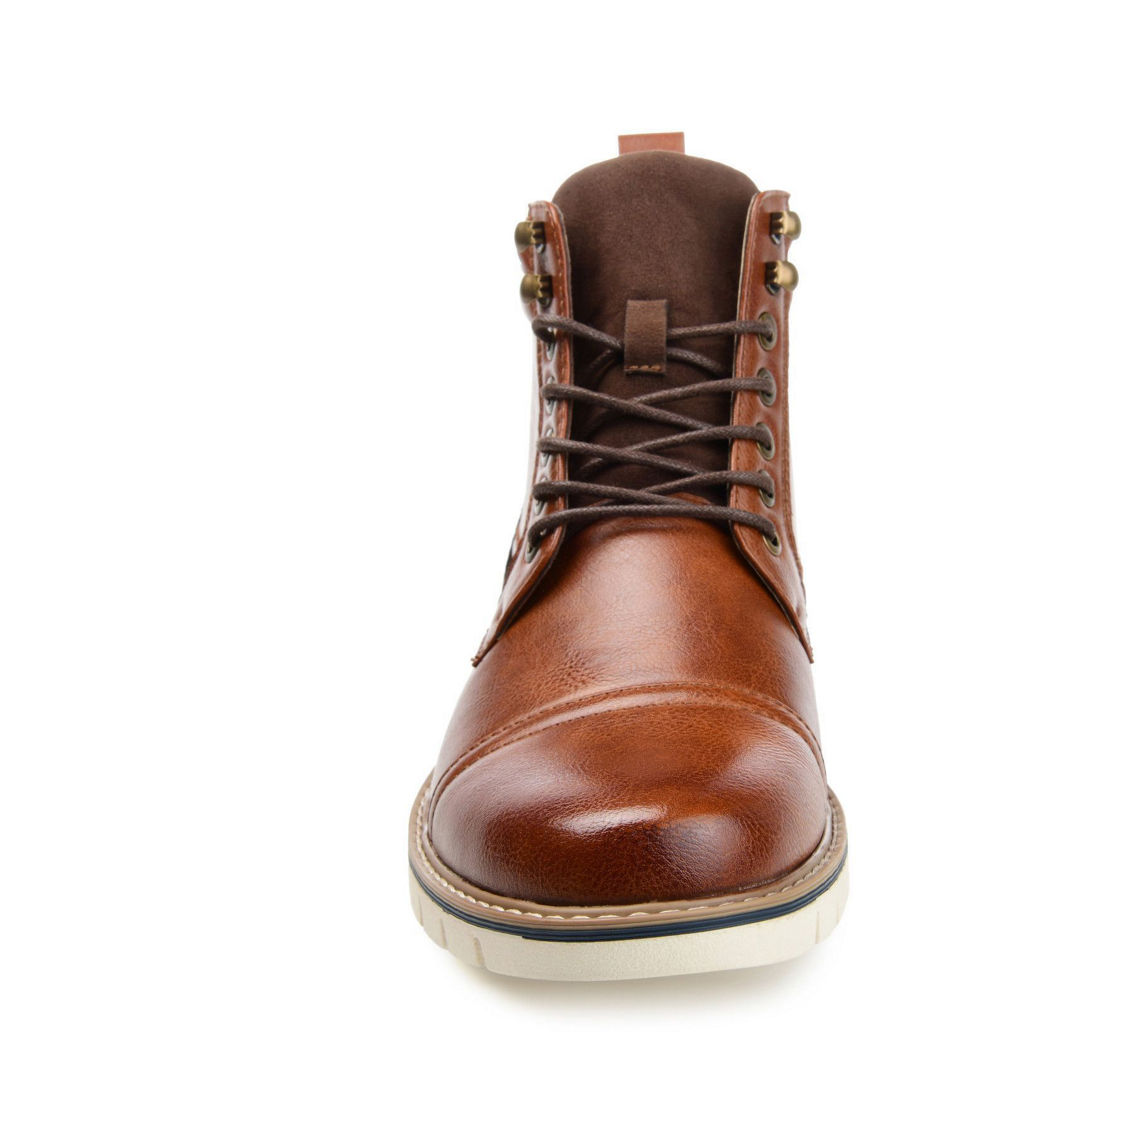 Vance Co. Lucien Cap Toe Ankle Boot - Image 2 of 2